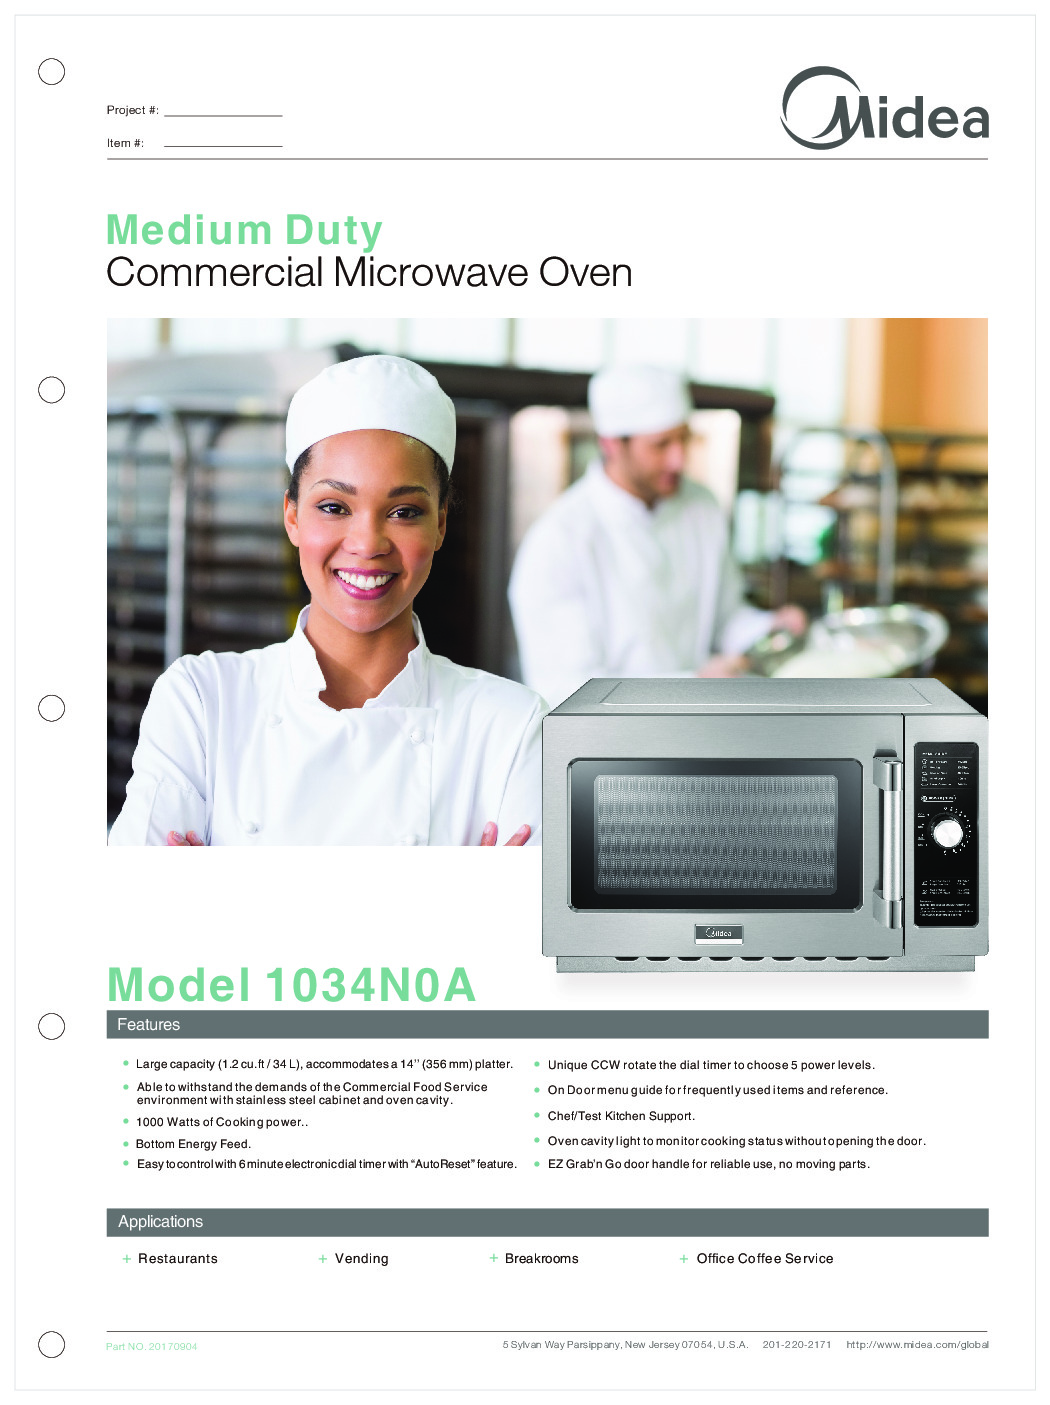 Midea 1034N0A 1000 Watts Medium Duty Dial Commercial Microwave Oven, 1.2 cu. ft.